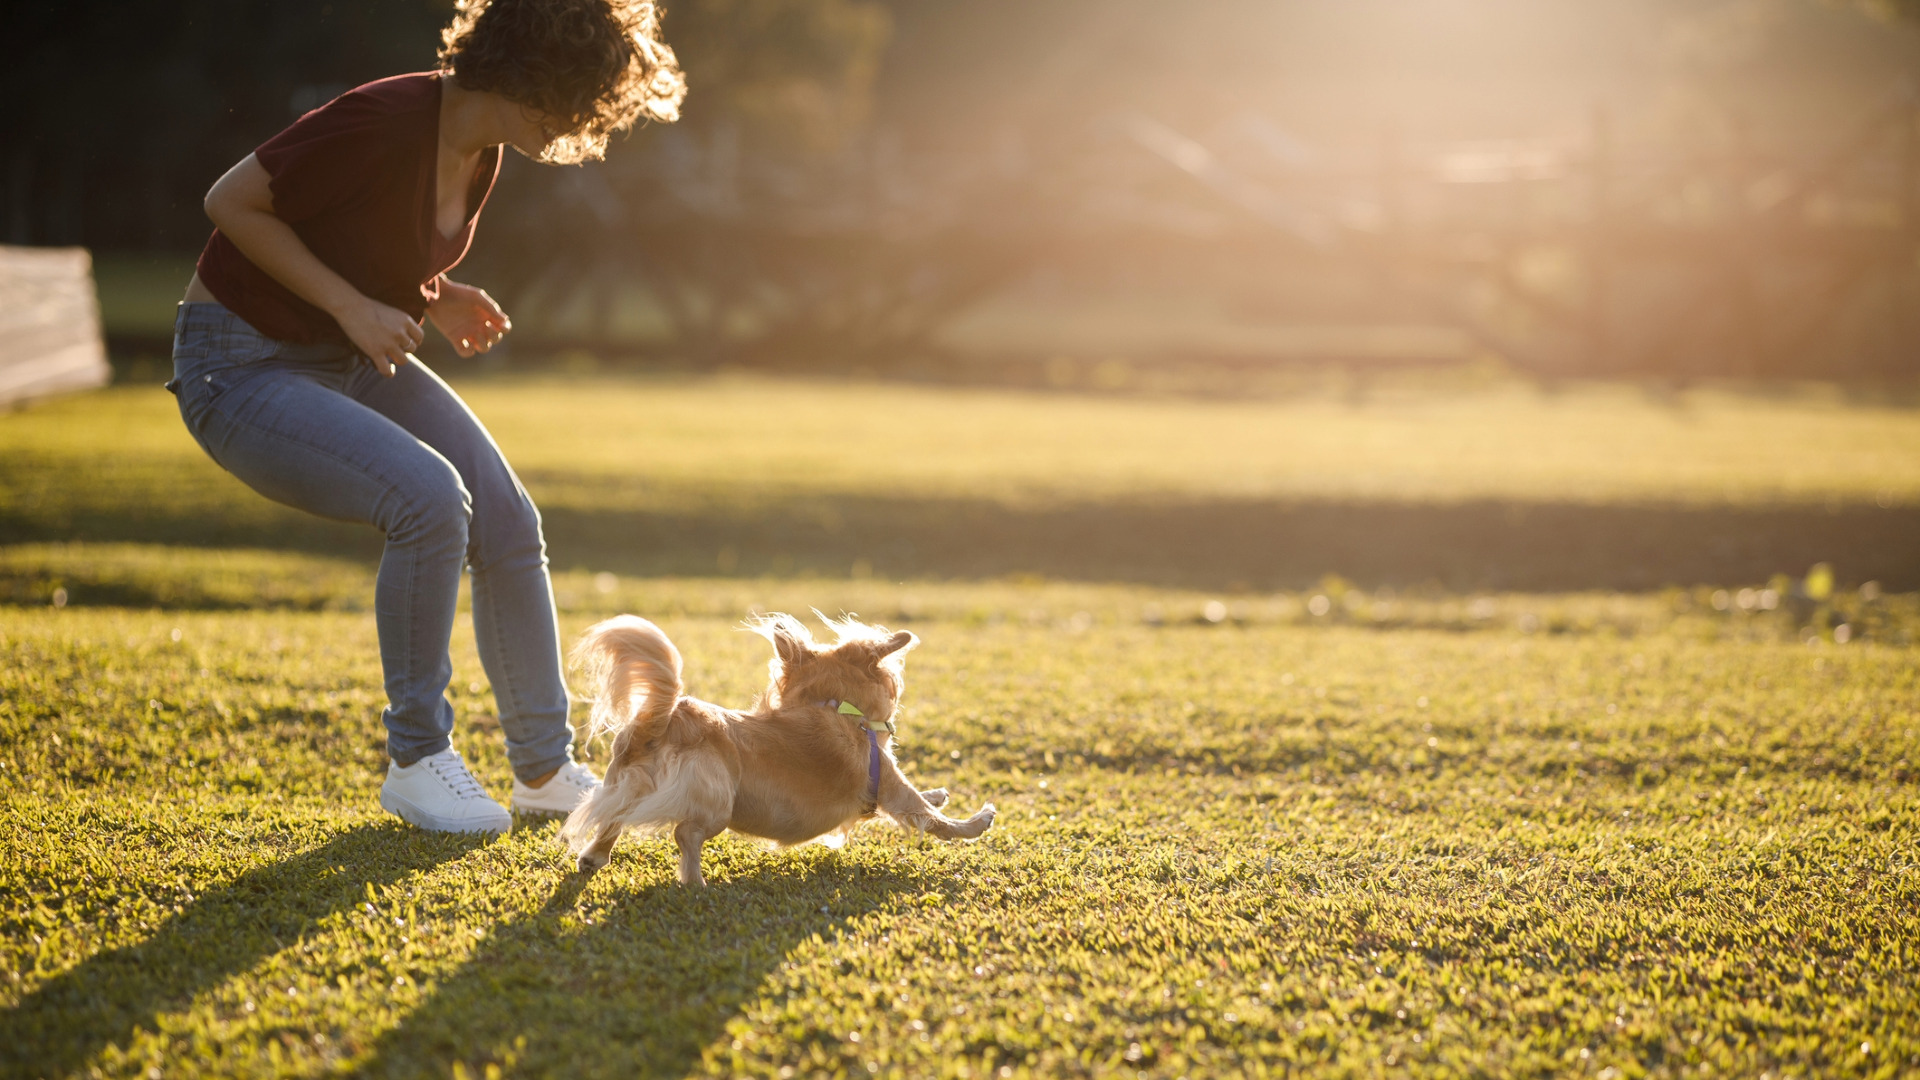 a woman and small dog play together in a park